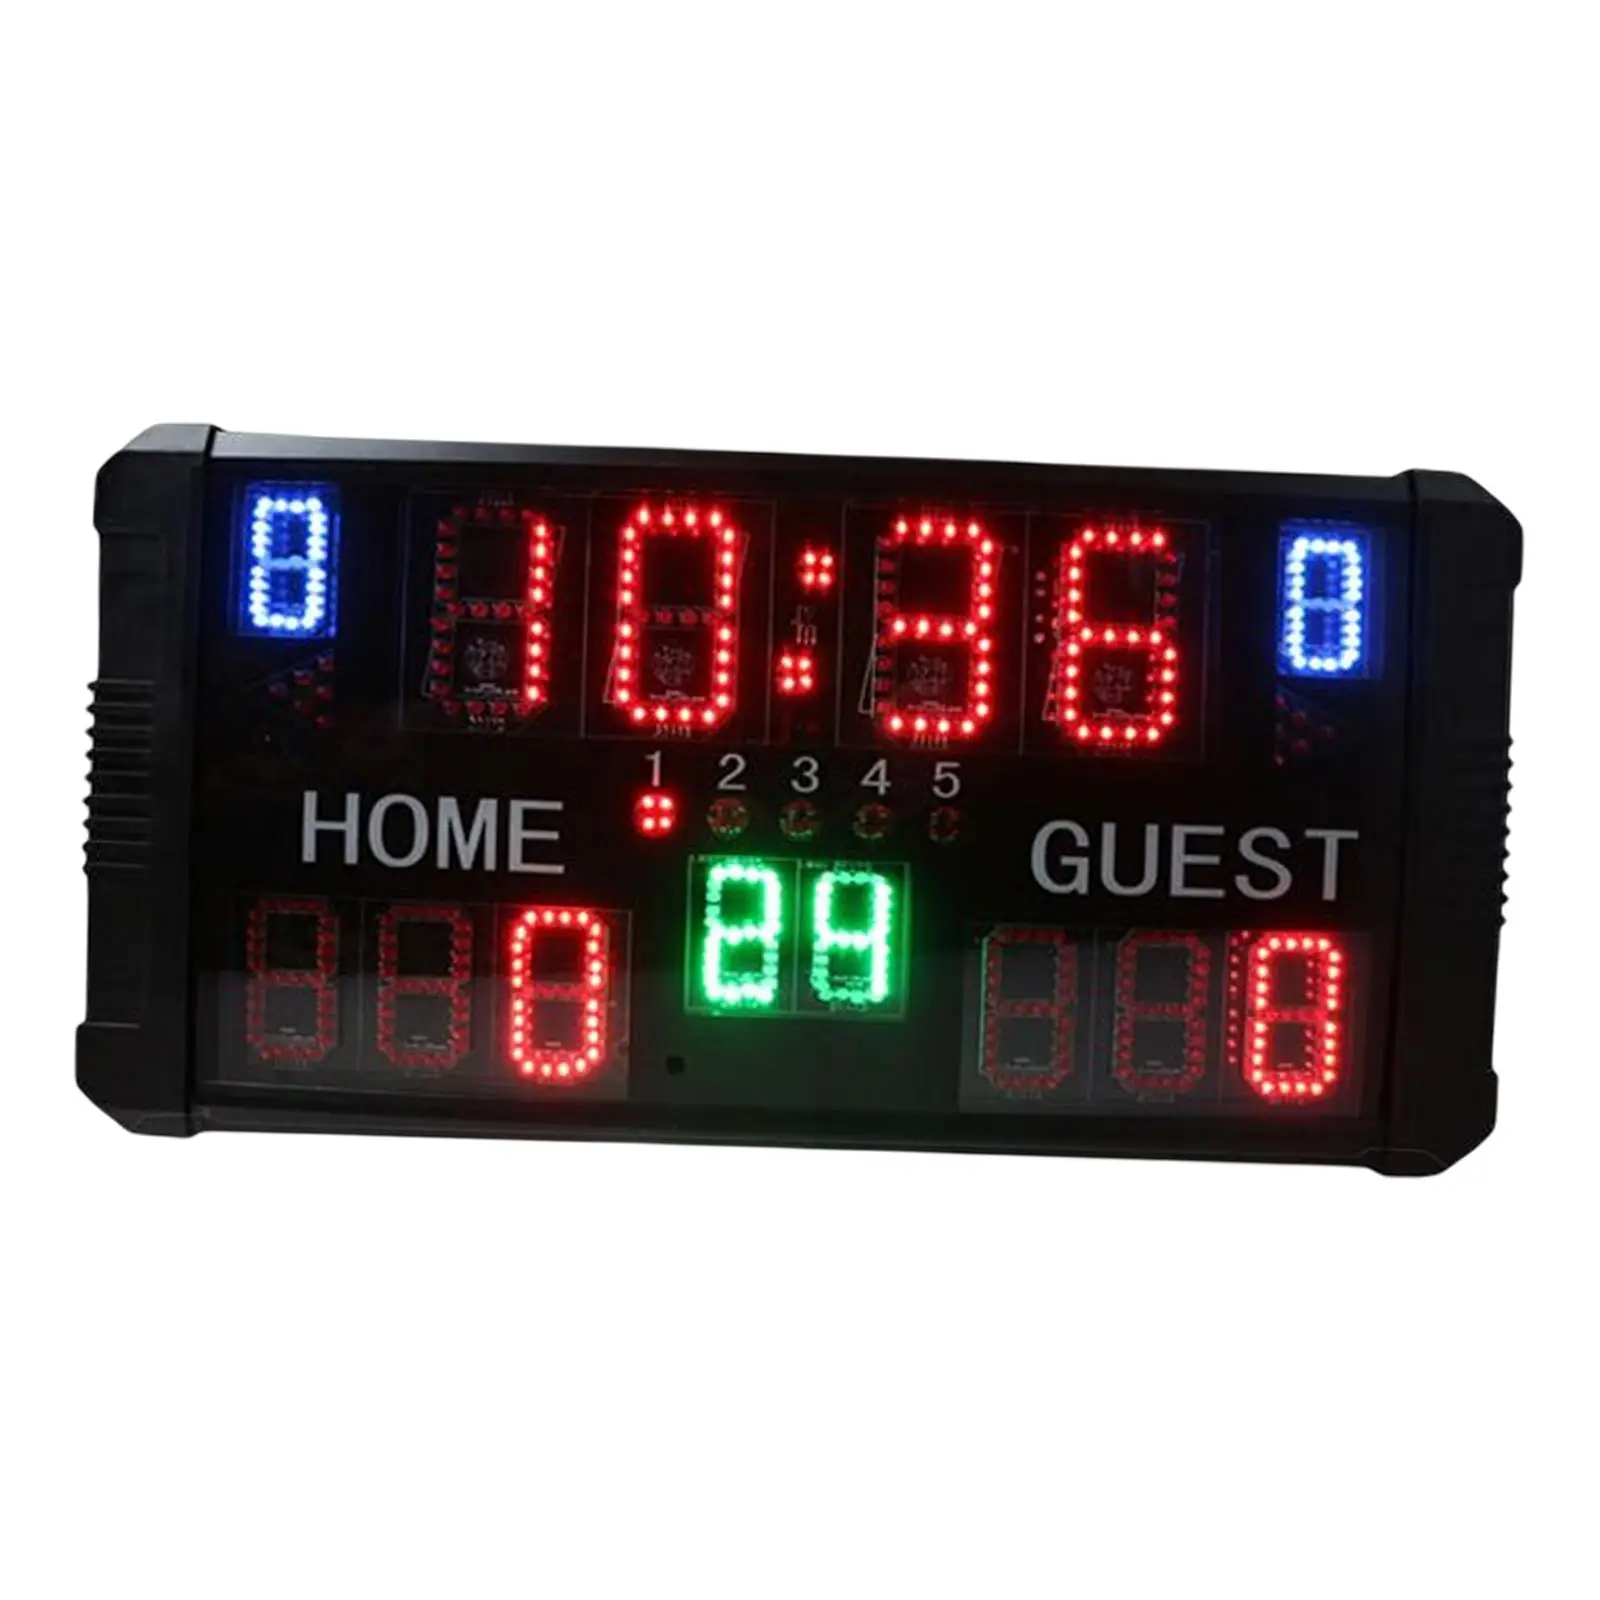 Portable Indoor Basketball Scoreboard Score Counting Timer Counter Electronic Digital Scoreboard Score Keeper for Games Sports